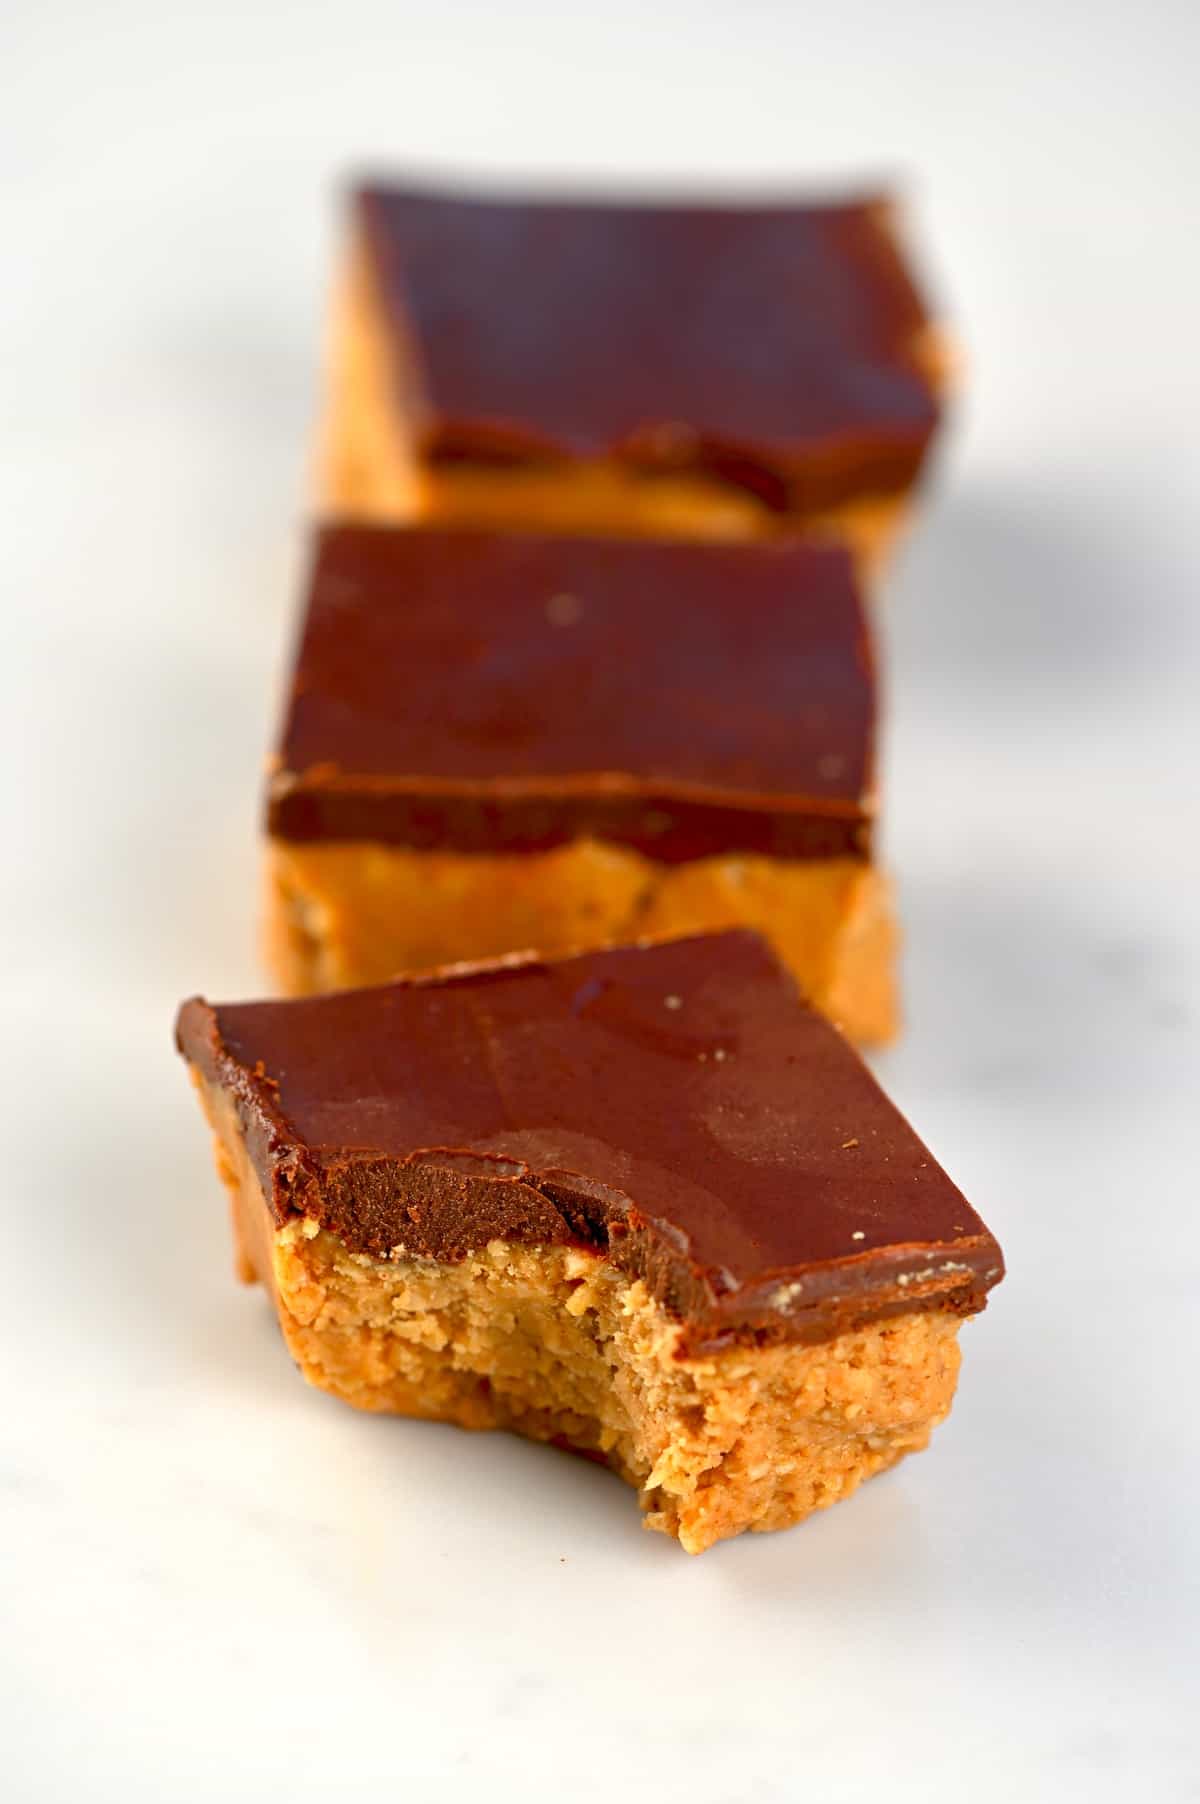 Three peanut butter bars with chocolate coating